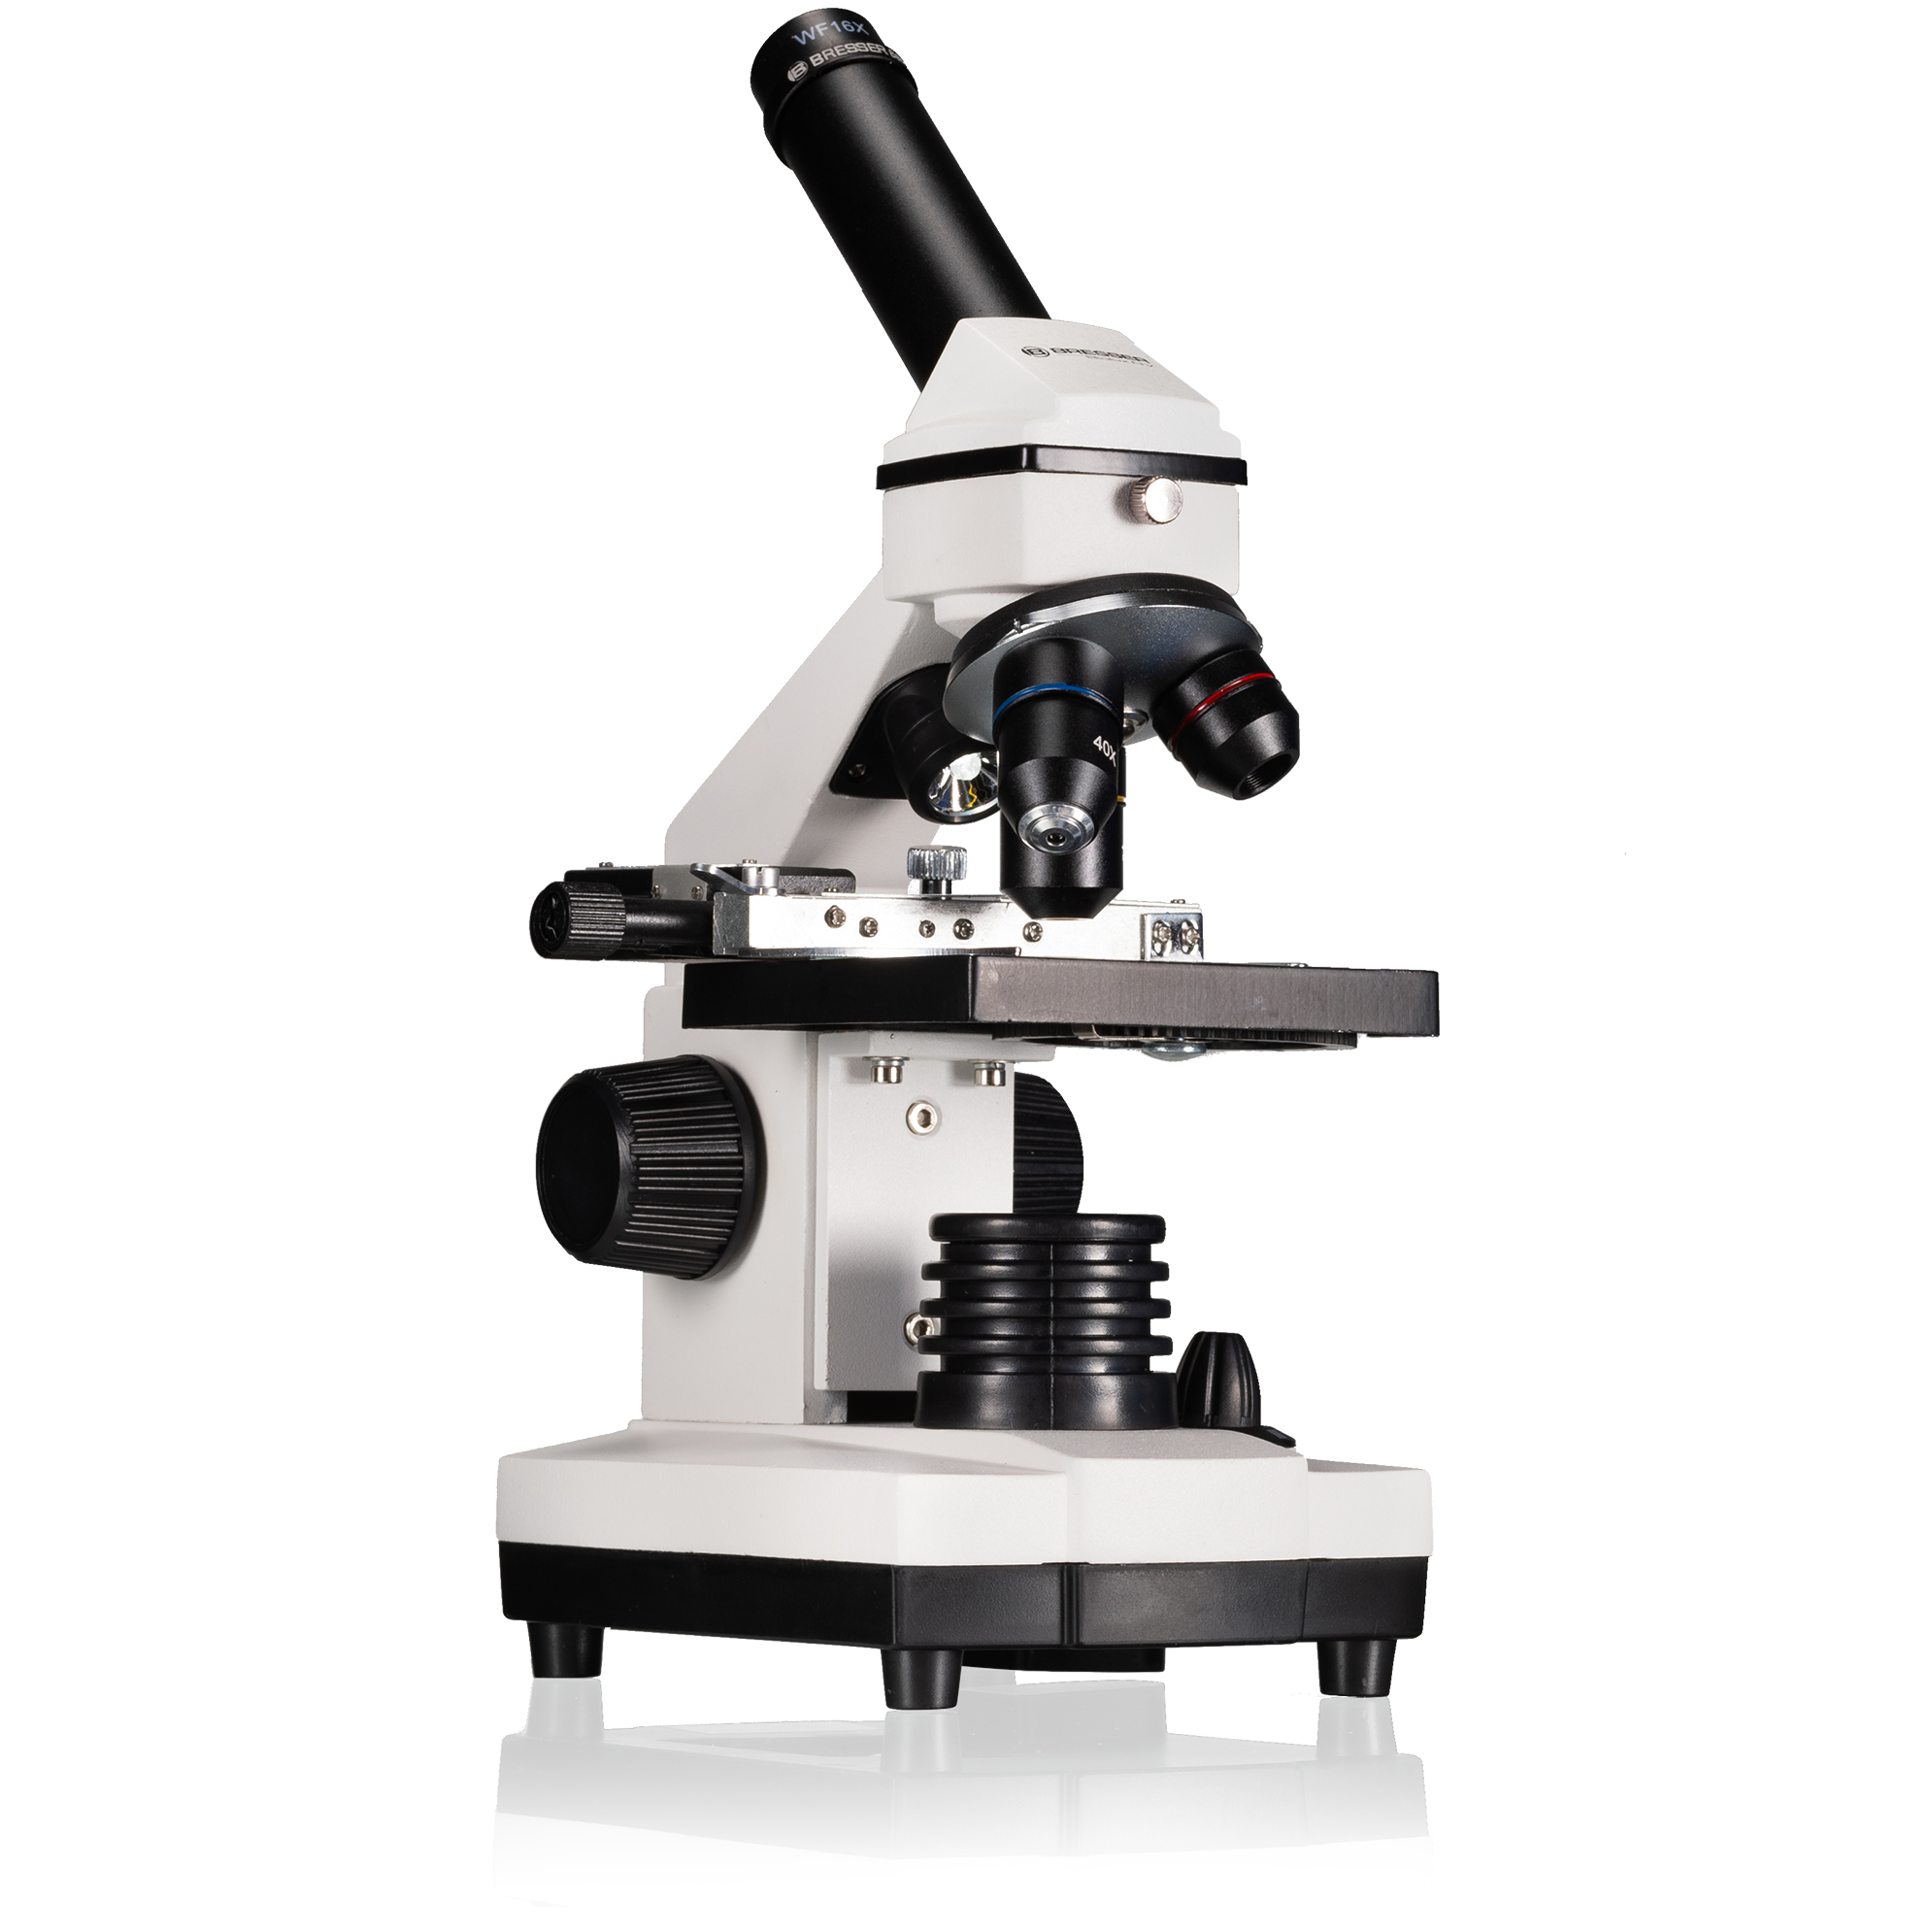 Bresser | with BRESSER NV Microscope 20x-1280x | HD USB Horizon Camera Biolux Expand Your